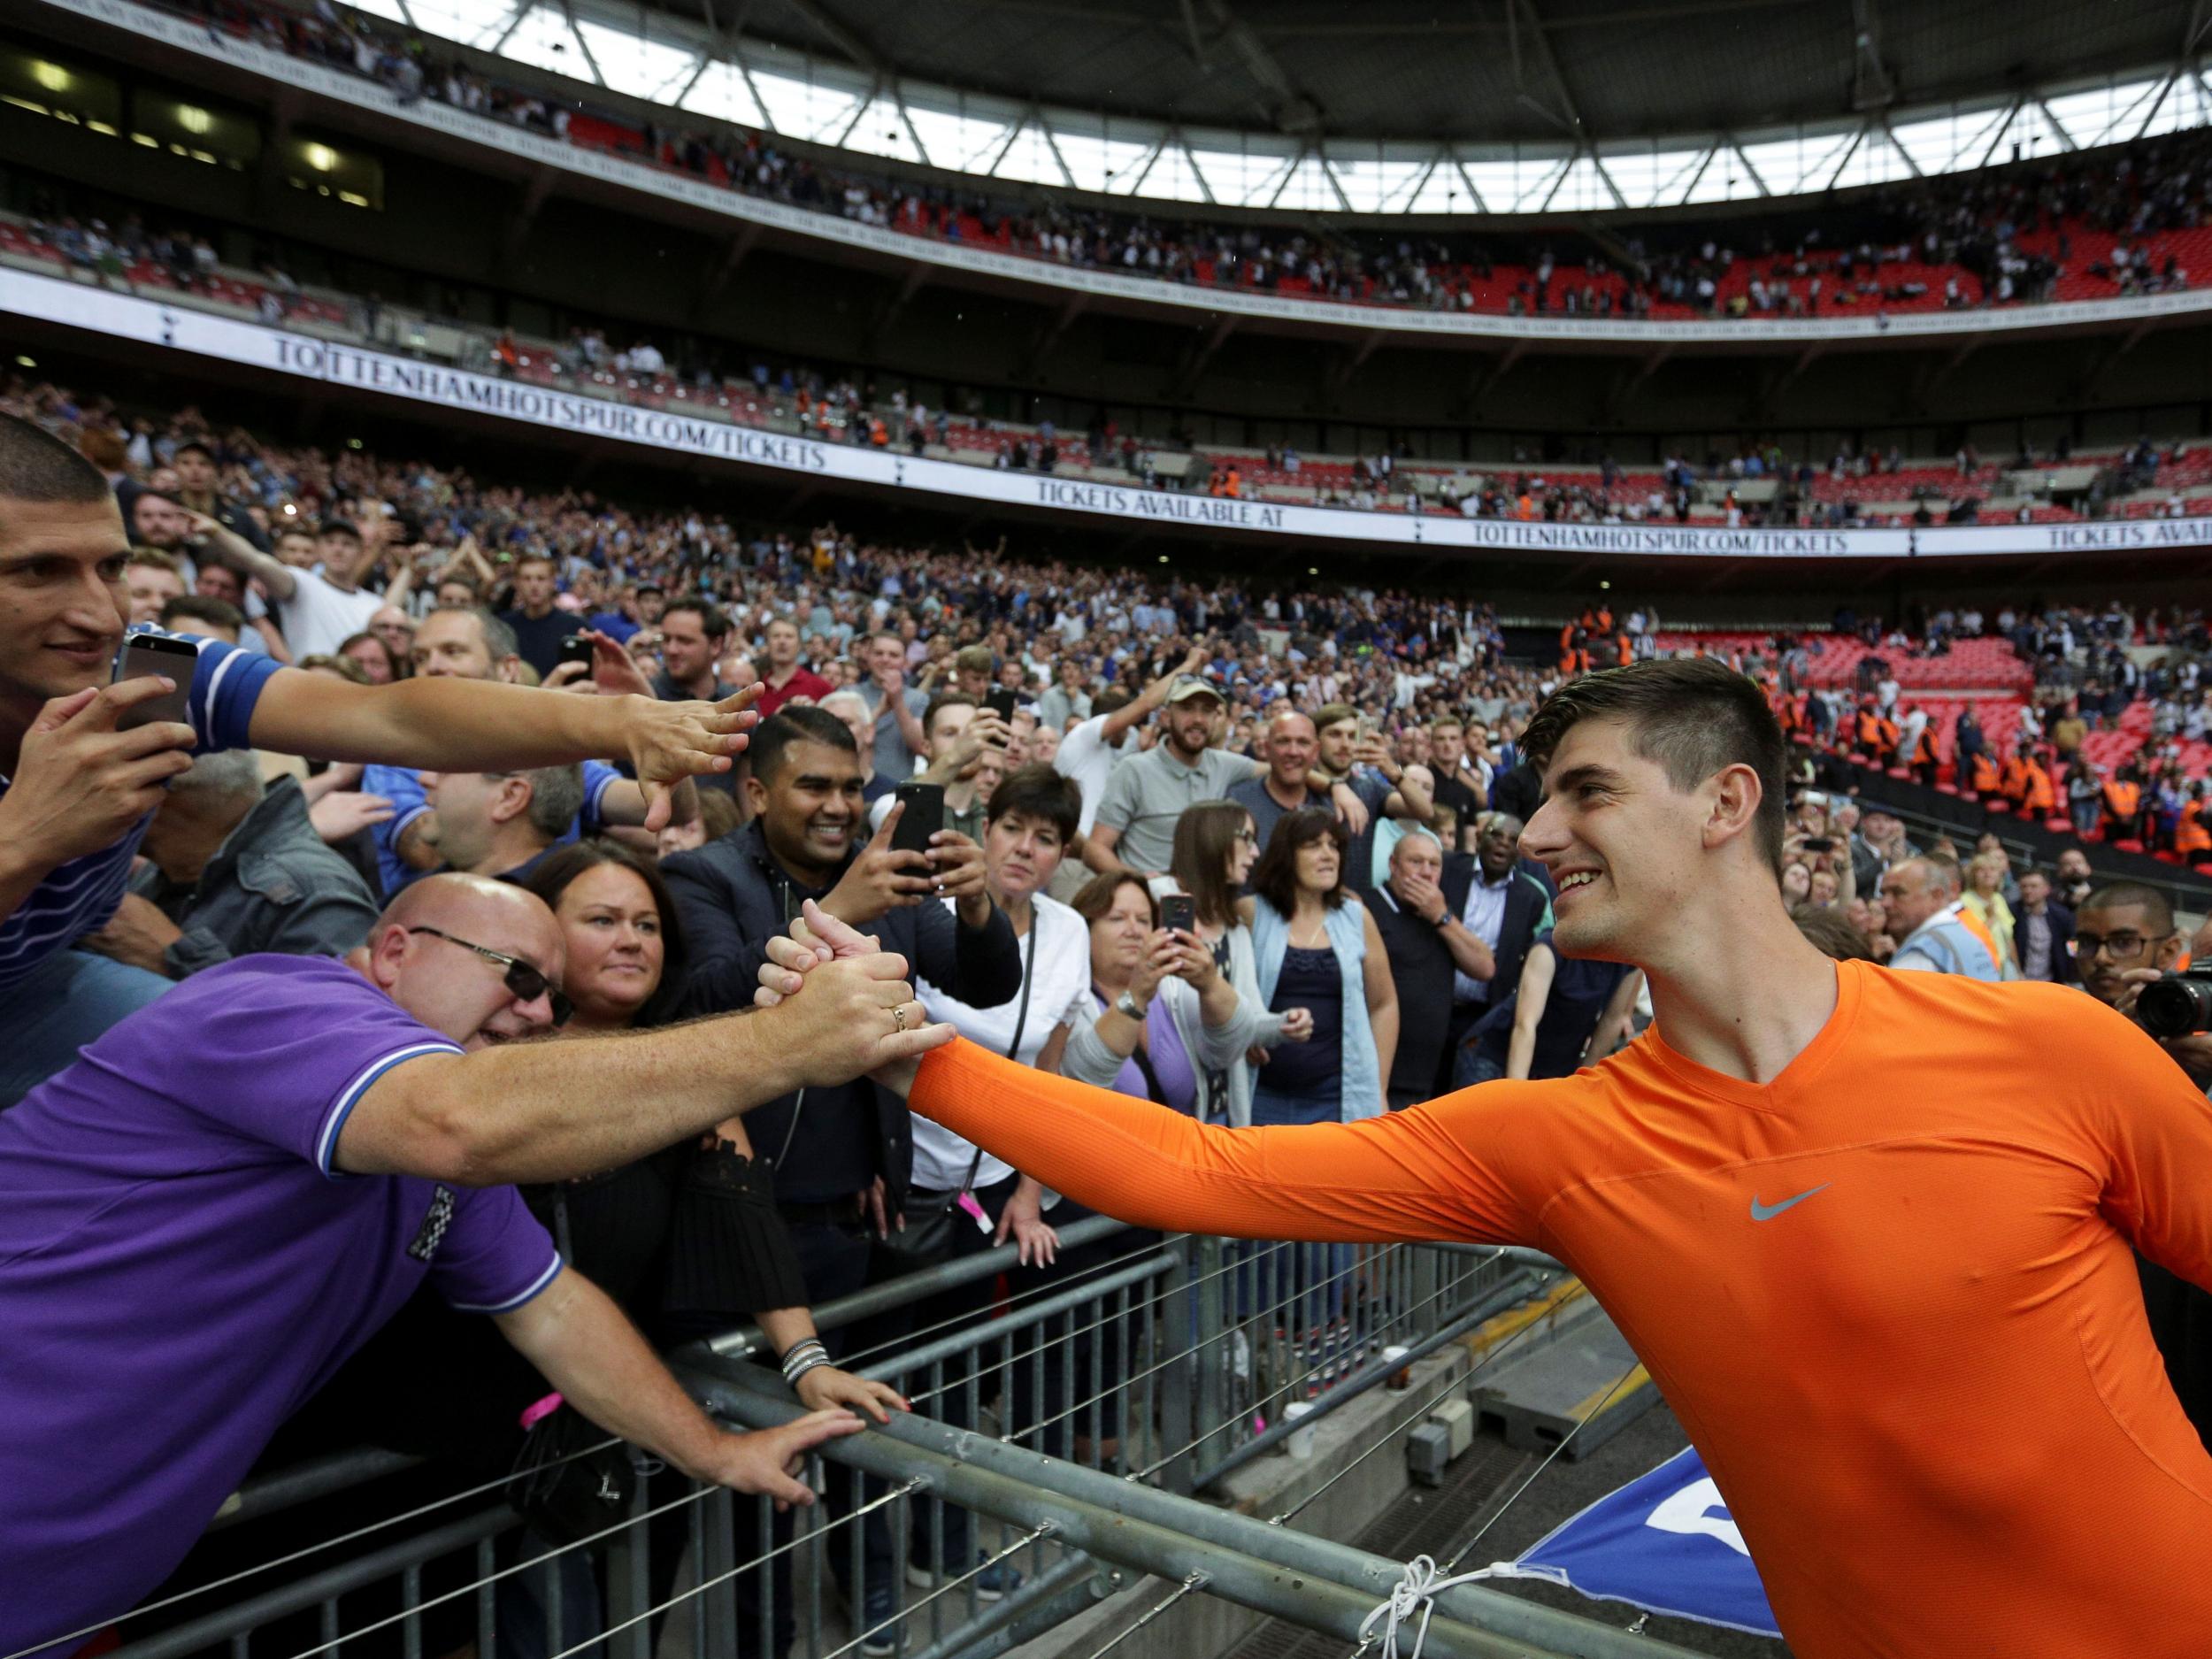 Courtois did not hold back in his criticisms of Spurs